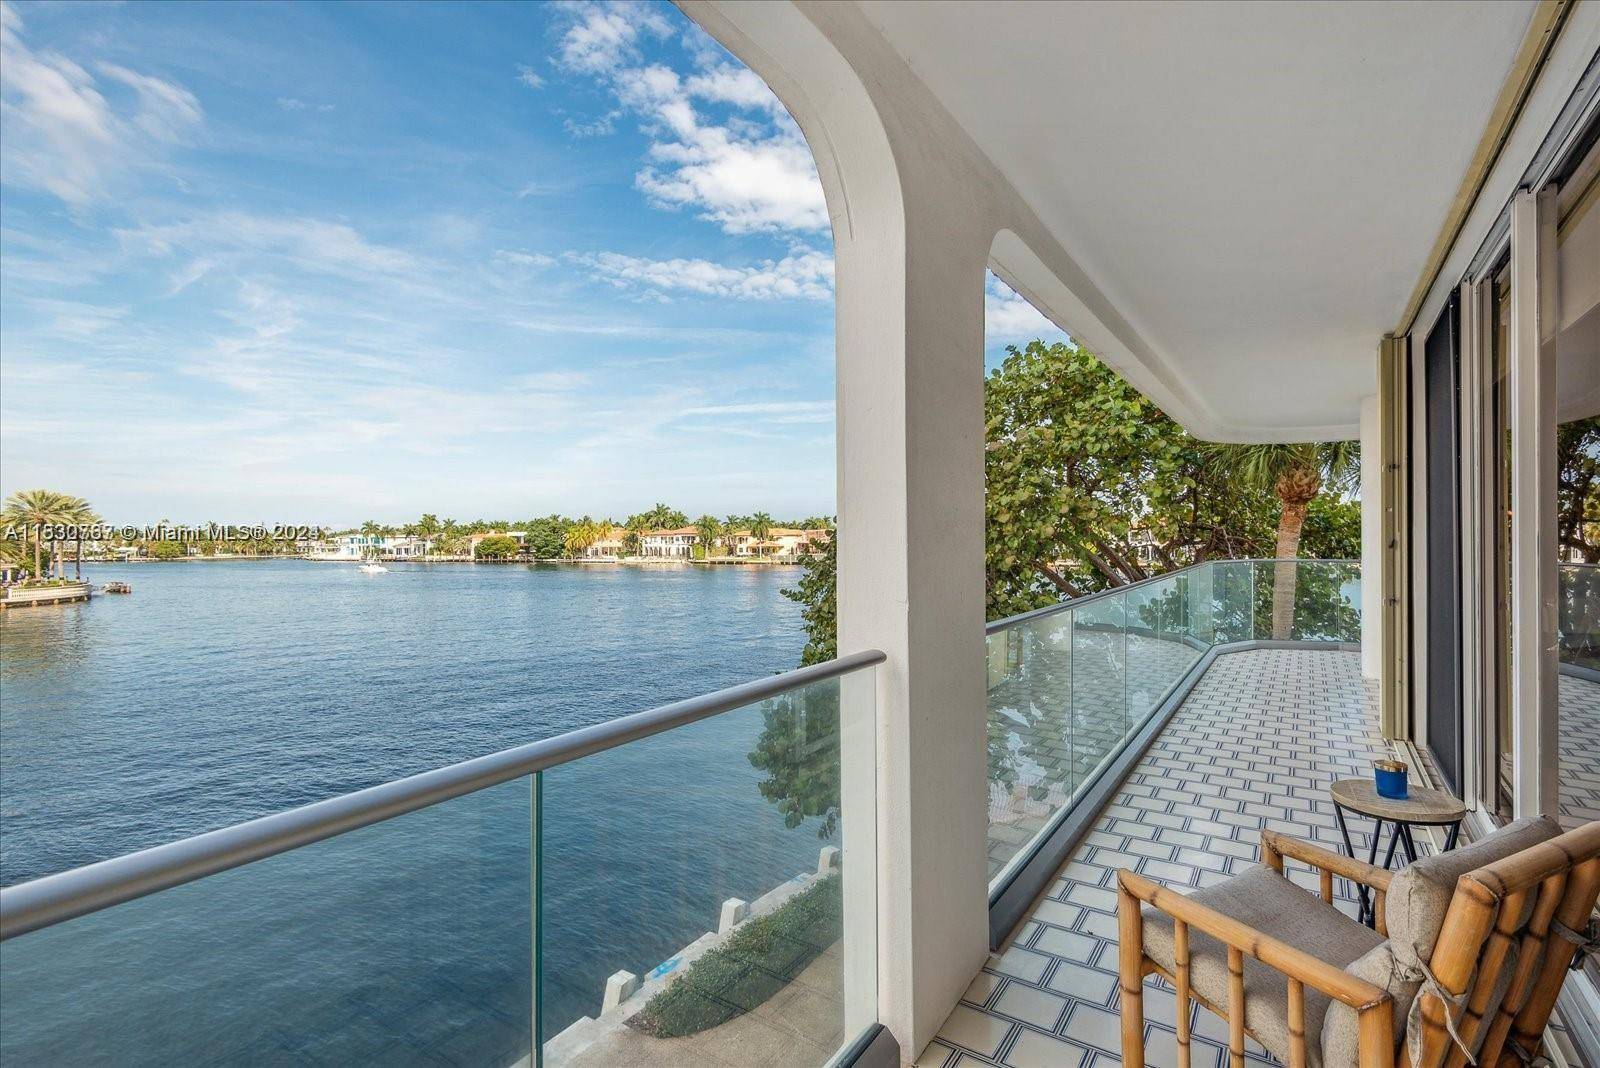 Exquisite Spacious... WATERFRONT TOWNHOME Directly on the Intracoastal Waterway.